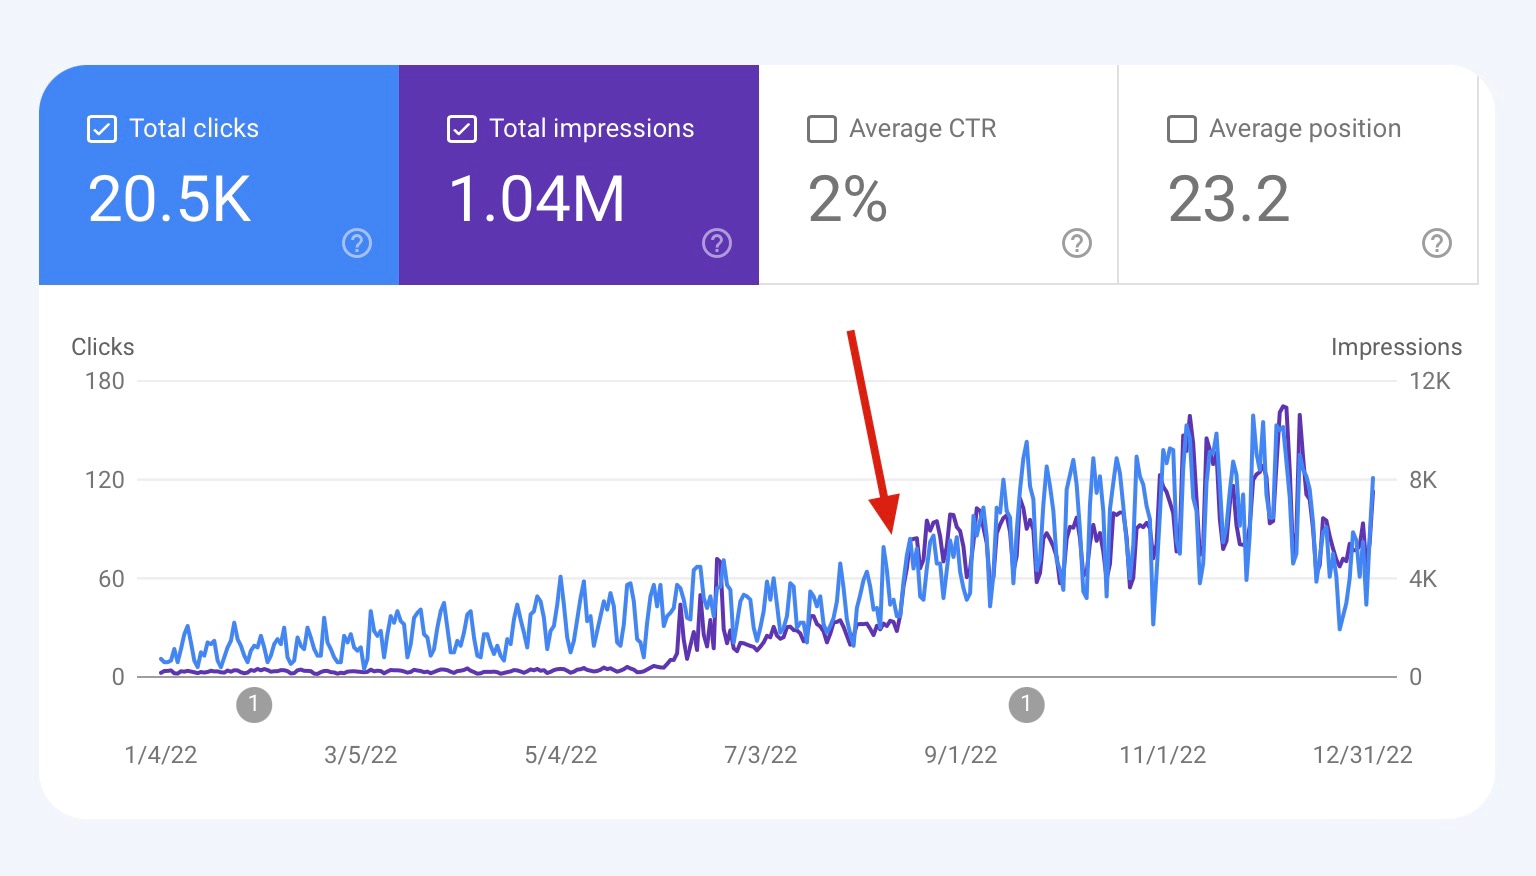 The moment when programmatic SEO kicked in